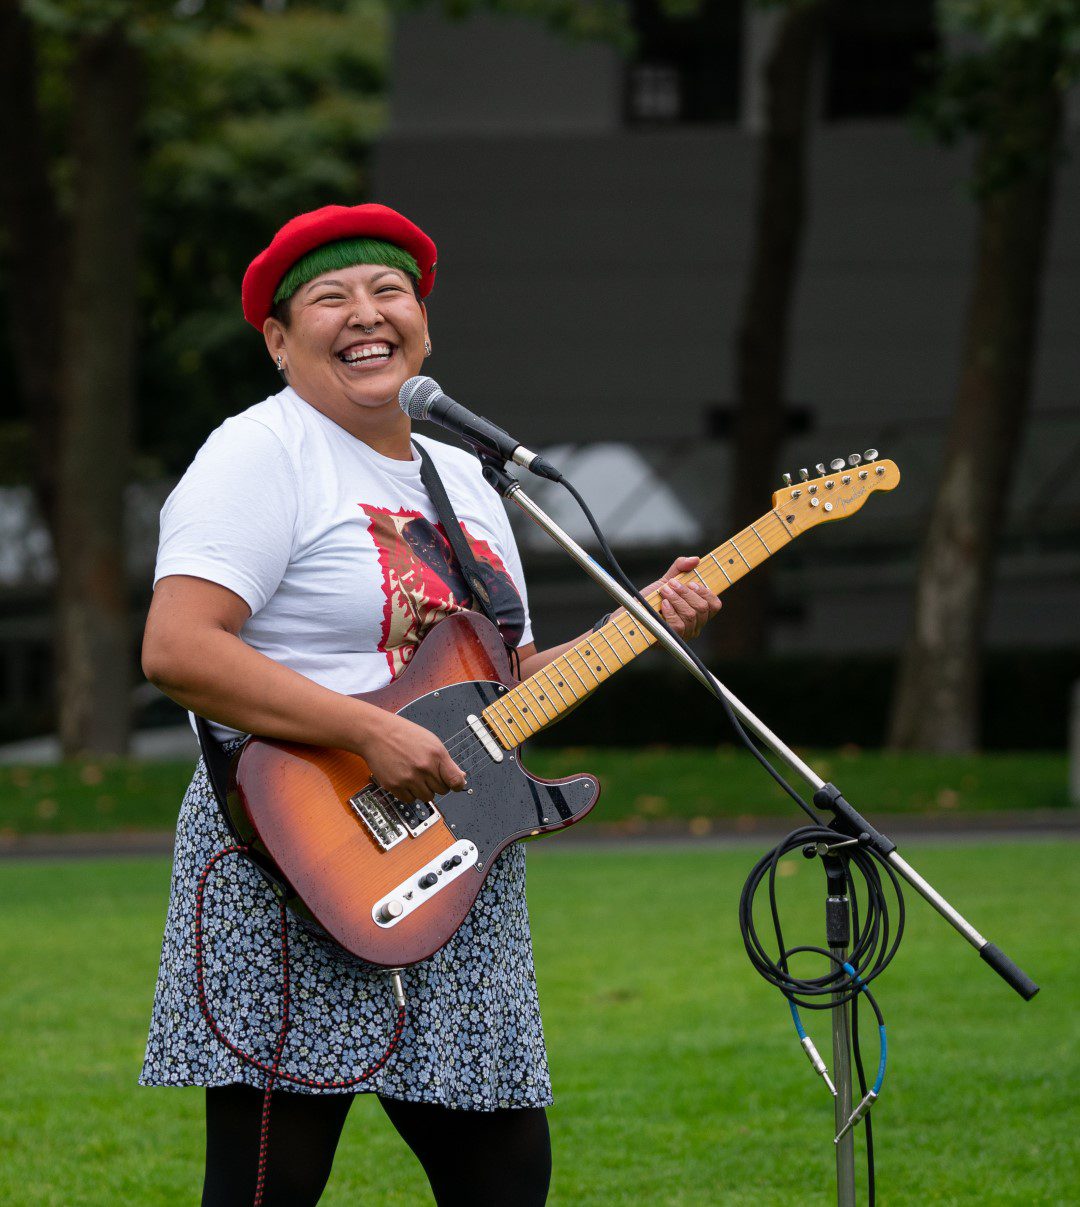 A woman playing an electric guitar, microphone stand; grass; trees; building in the background; daytime